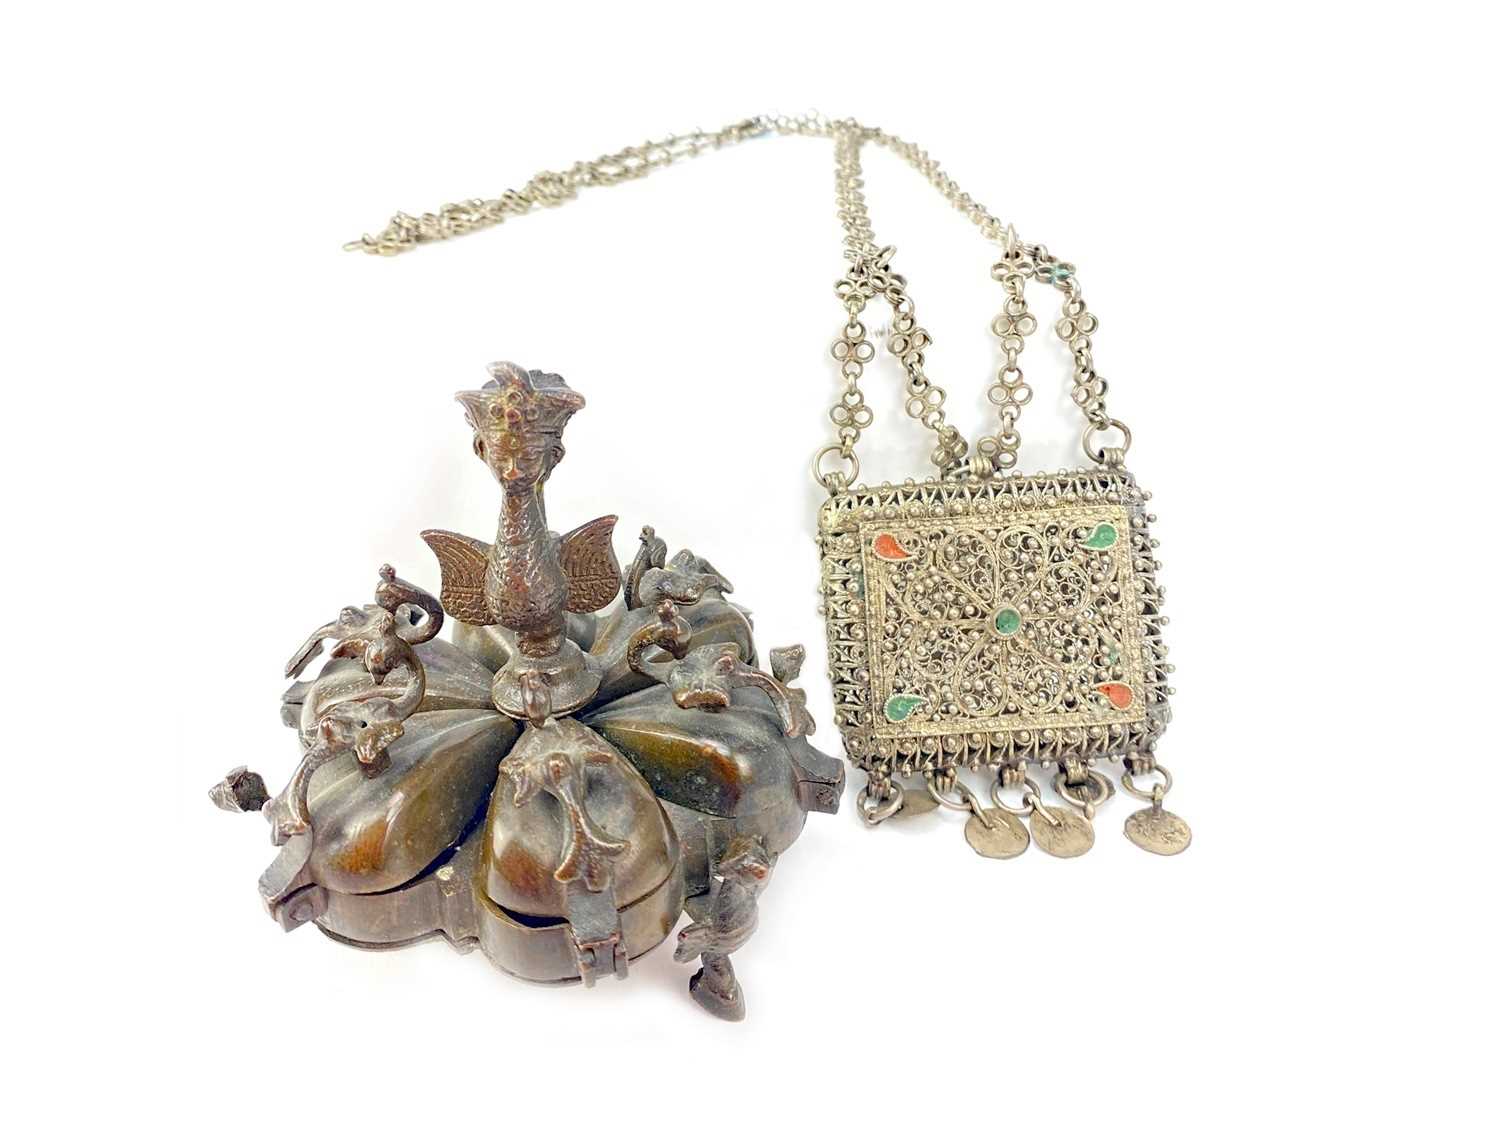 Lot 713 - AN EASTERN BRONZE SPICE BOX AND A FILIGREE PURSE